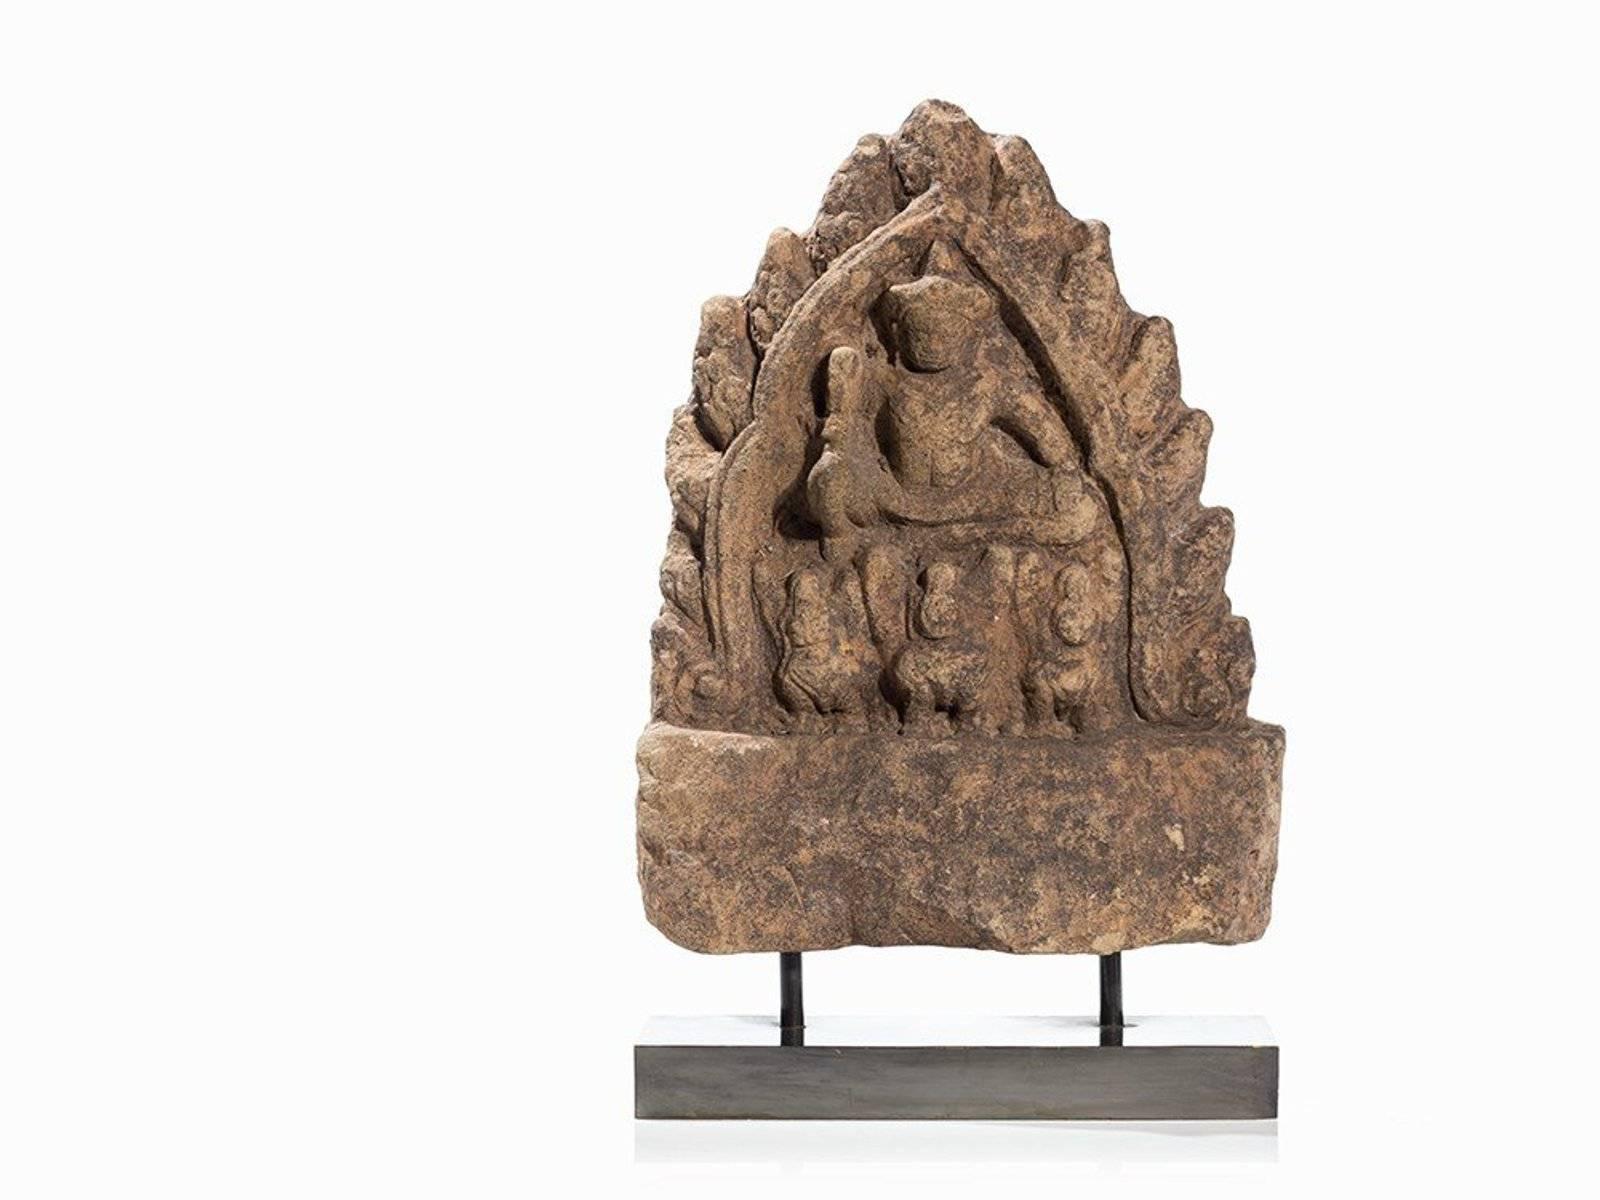 A superb sandstone figure of Indra
Cambodia, Khmer Kingdom, Angkor period, Bayon style, 12th-13th century

Superb Angkor Figure Indra, A triangular shaped stele with the depiction of Indra in the center of a flamed niche. Seated in royal ease on